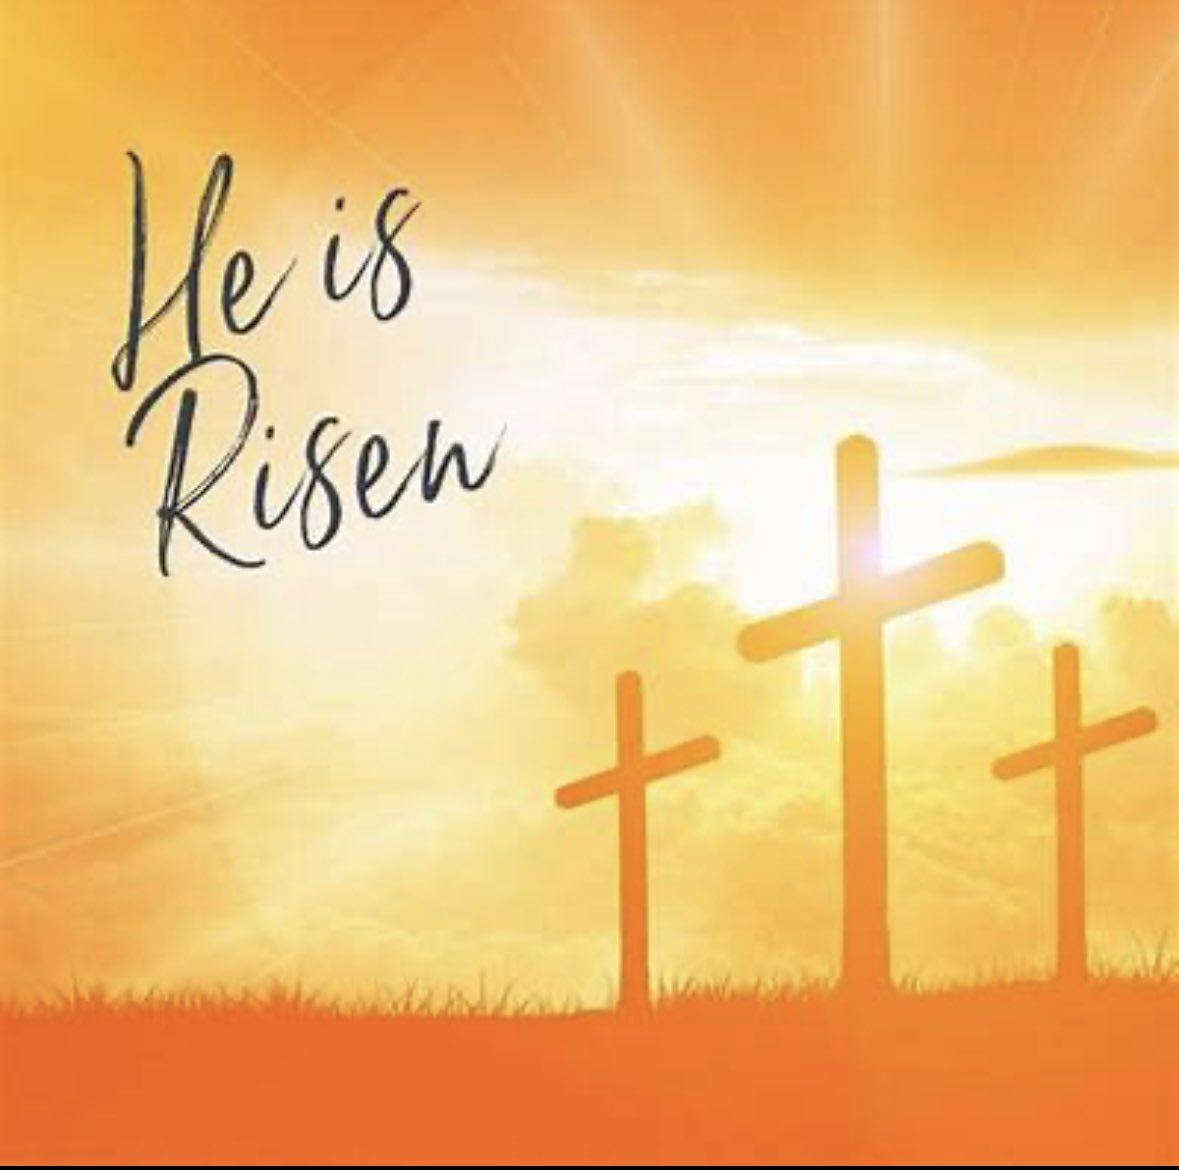 Happy Easter!! 🙌❤️✝️✝️✝️🔥🎉 Hope everyone has a great Easter Sunday.